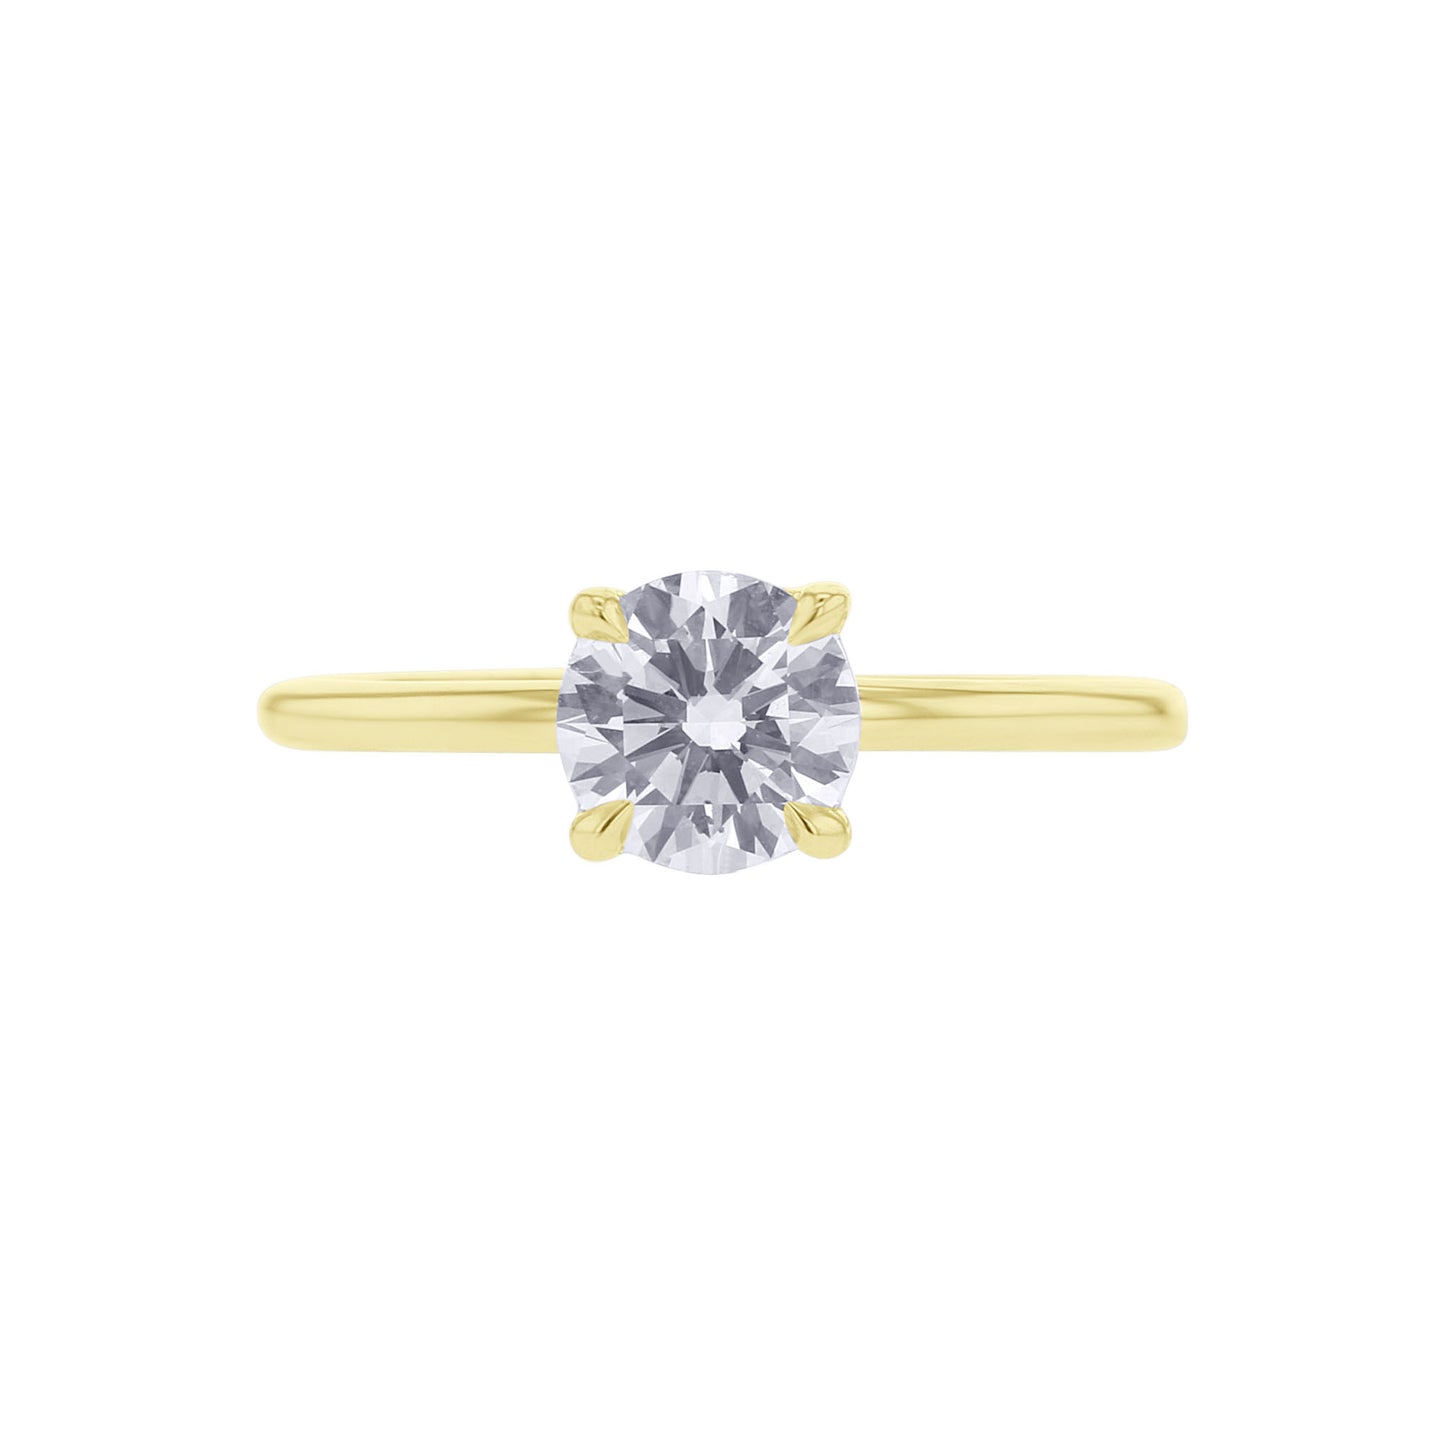 Ember Round Ready for Love Diamond Engagement Ring 1ct